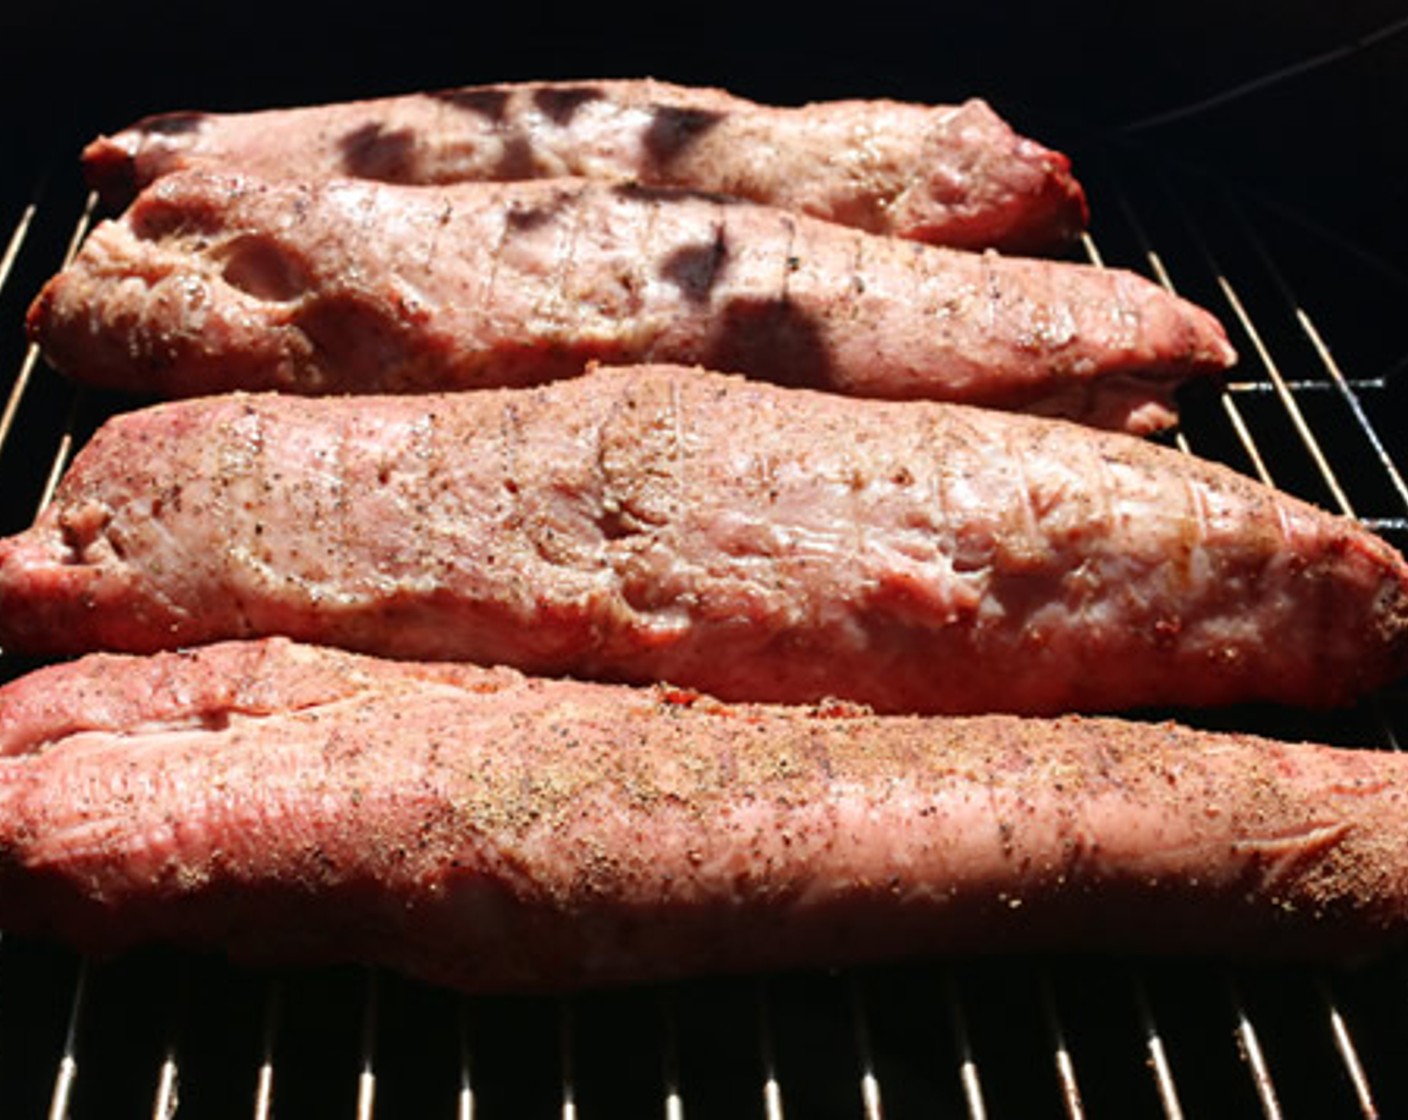 step 7 Remove any excess fat or silver skin from each Pork Tenderloin (4). Season with the Jerk Rub on all sides.Place each tenderloin on the cooking rack of the smoker and insert probe thermometer to monitor internal temperature.